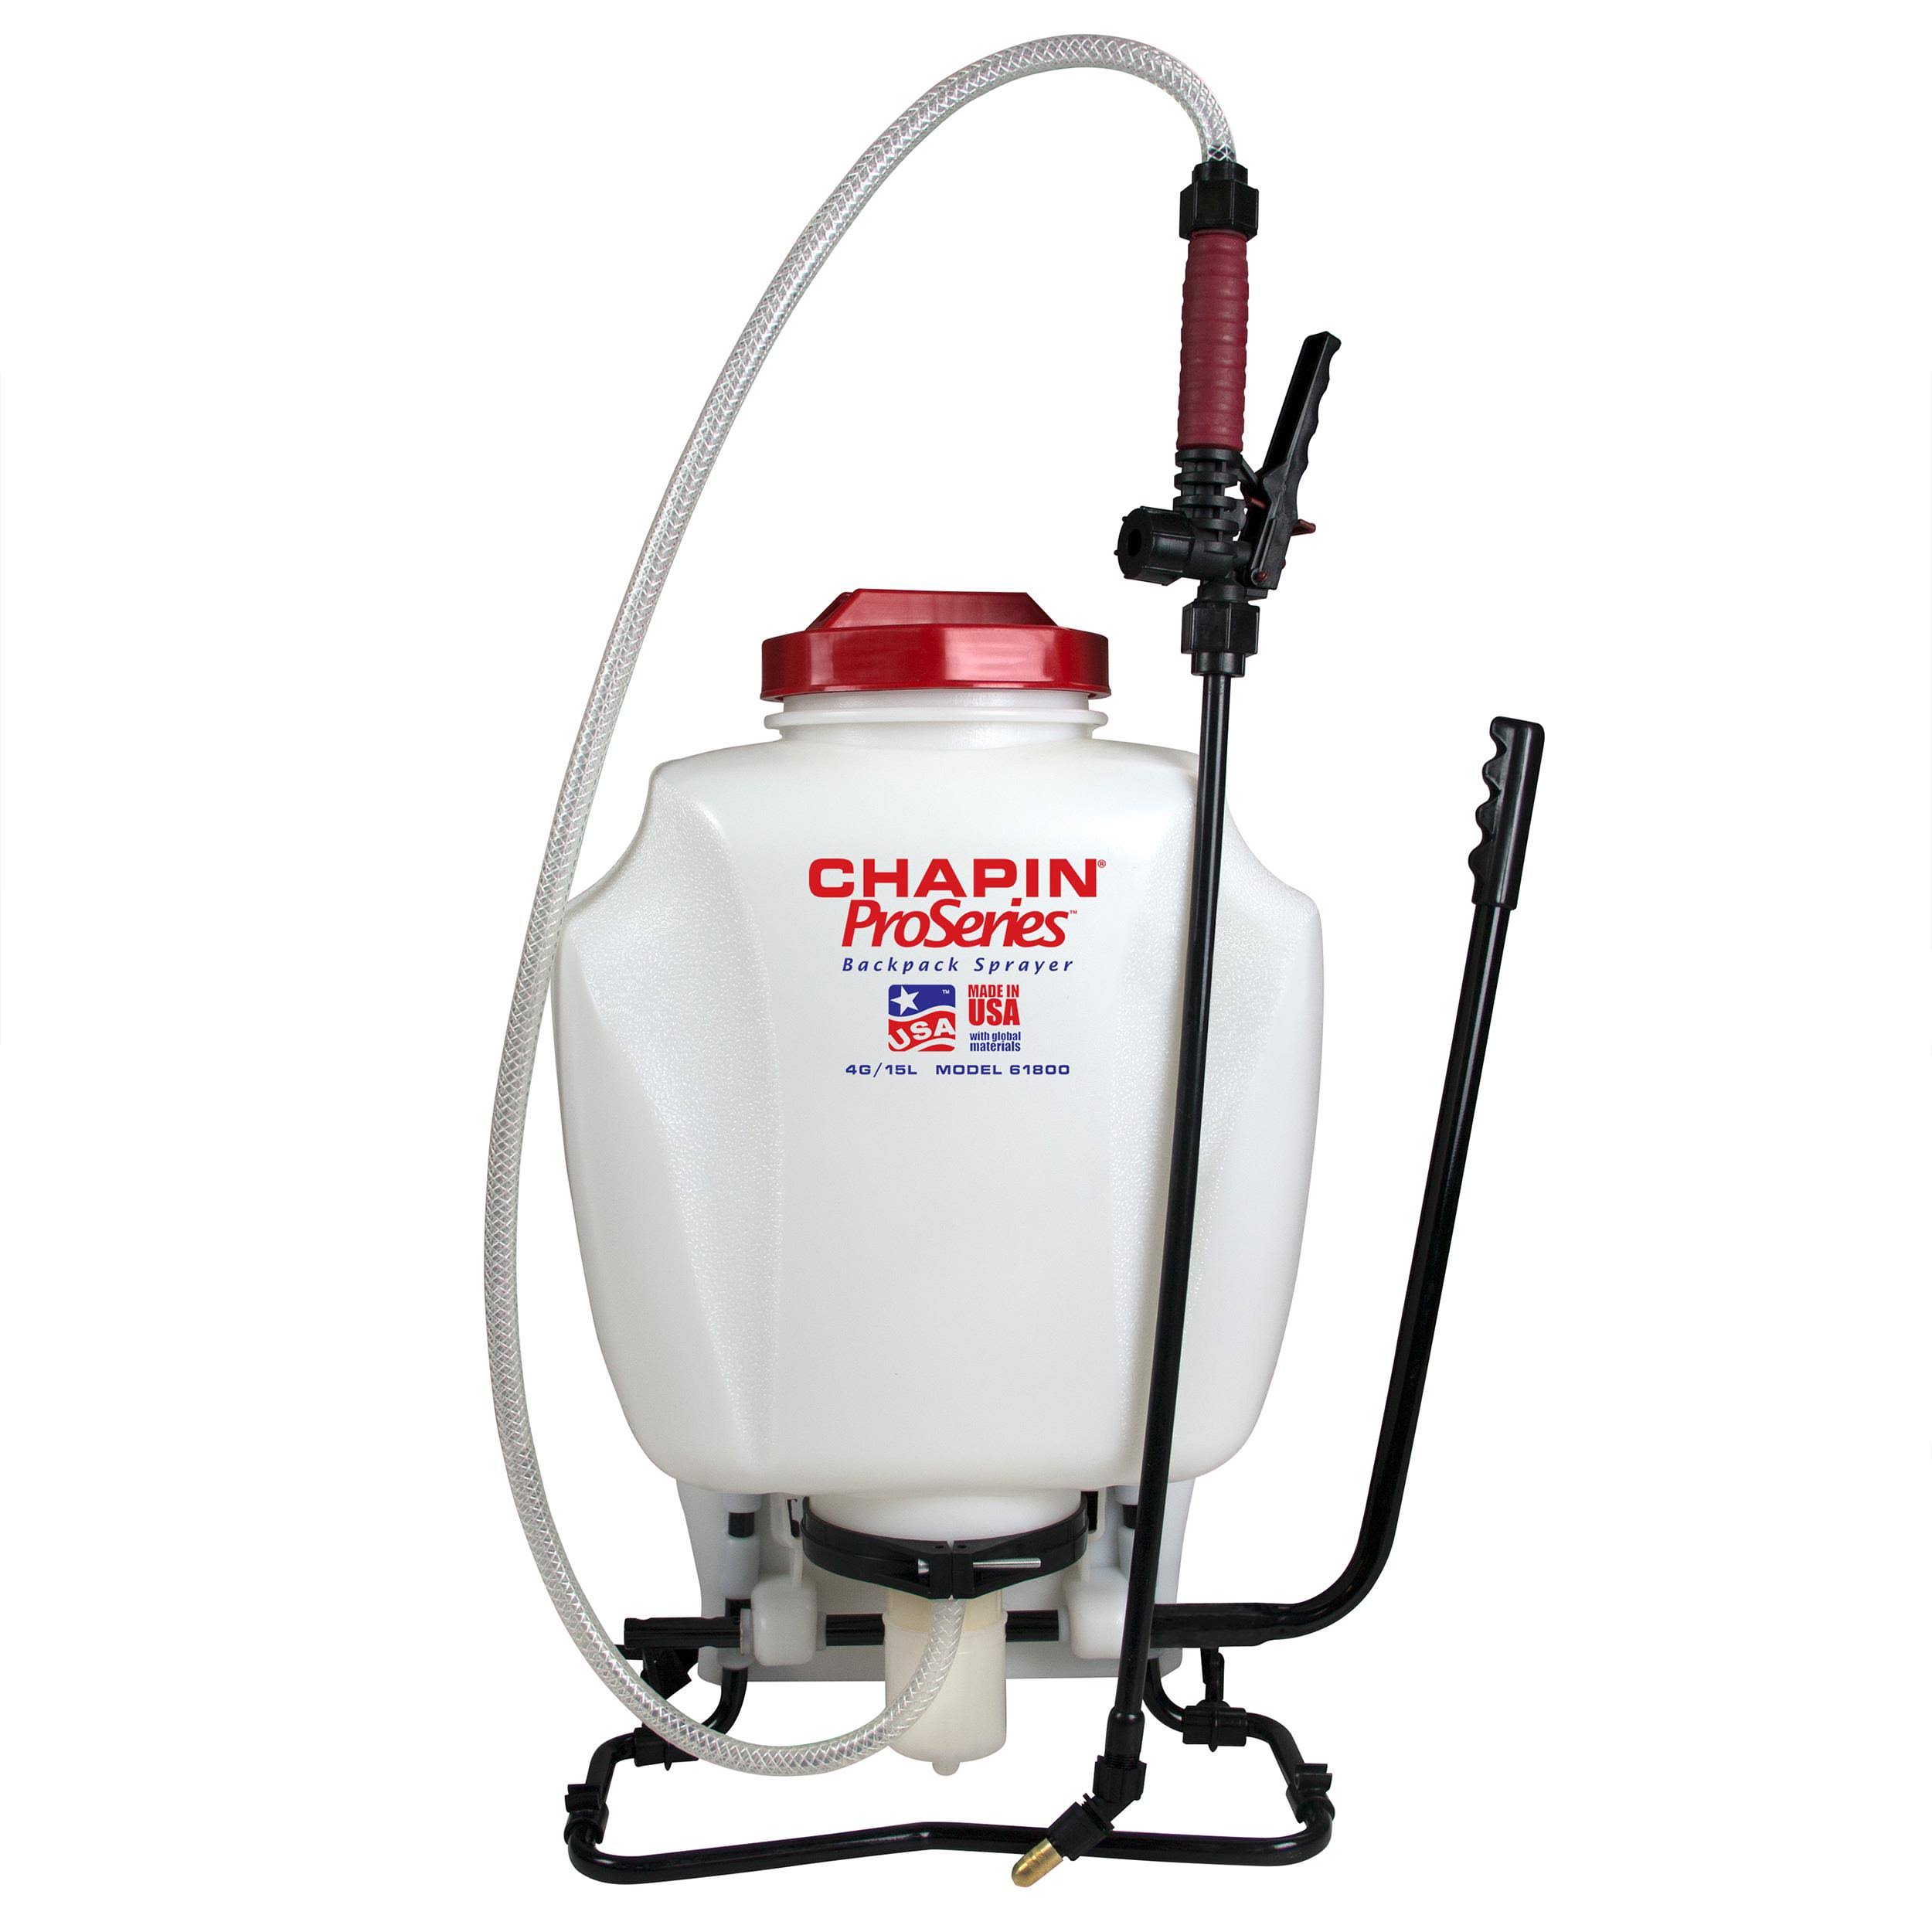 Re Chapin Mfg Works Pro Series Poly Backpack Sprayer - 4 Gallons